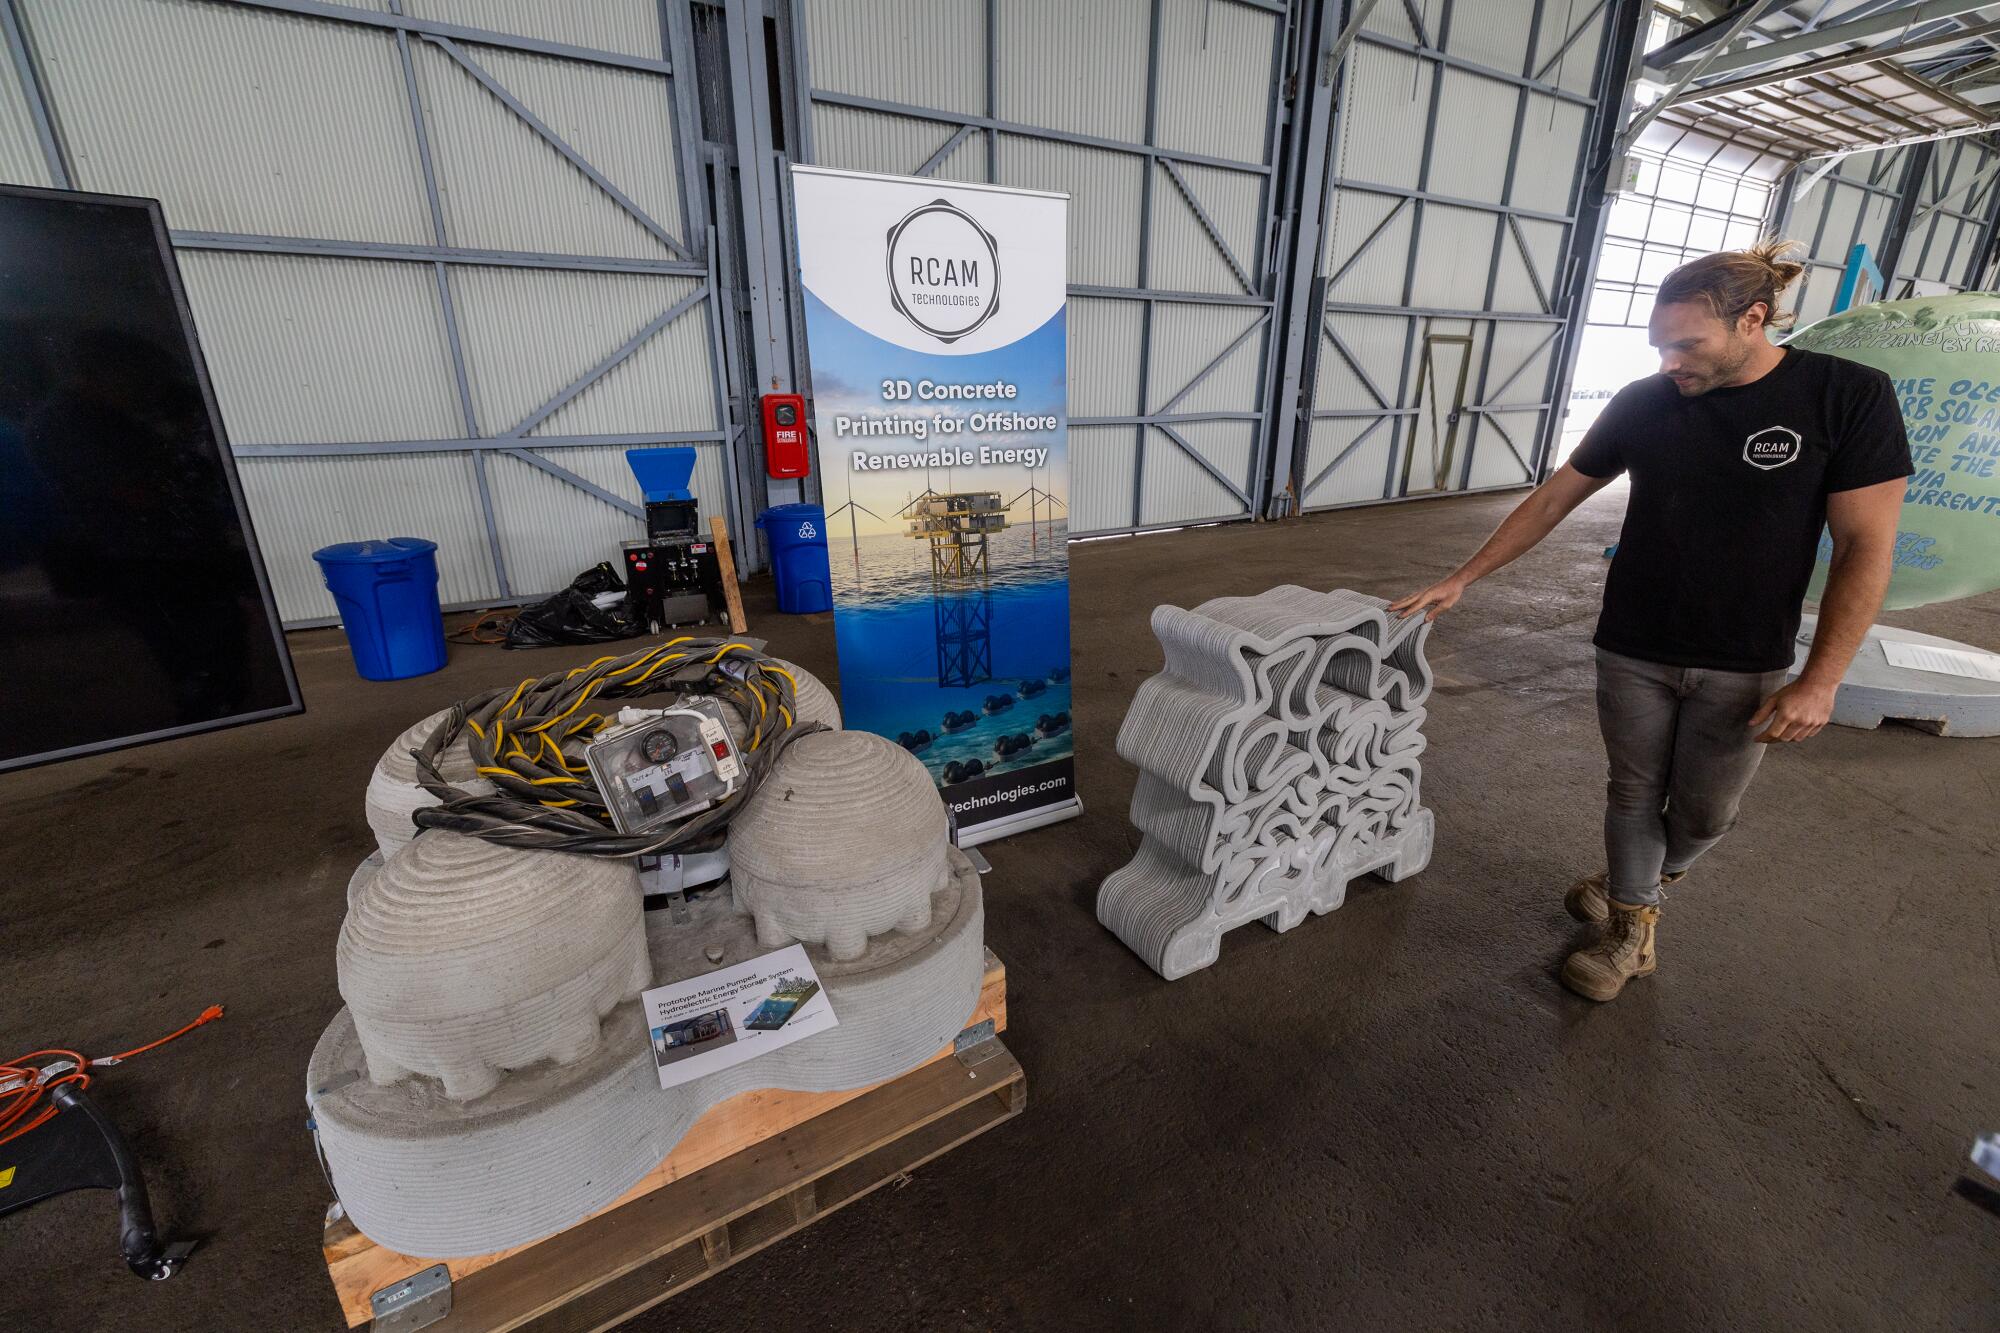 Taylor Marchment shows off 3D concrete printing for offshore renewable energy 